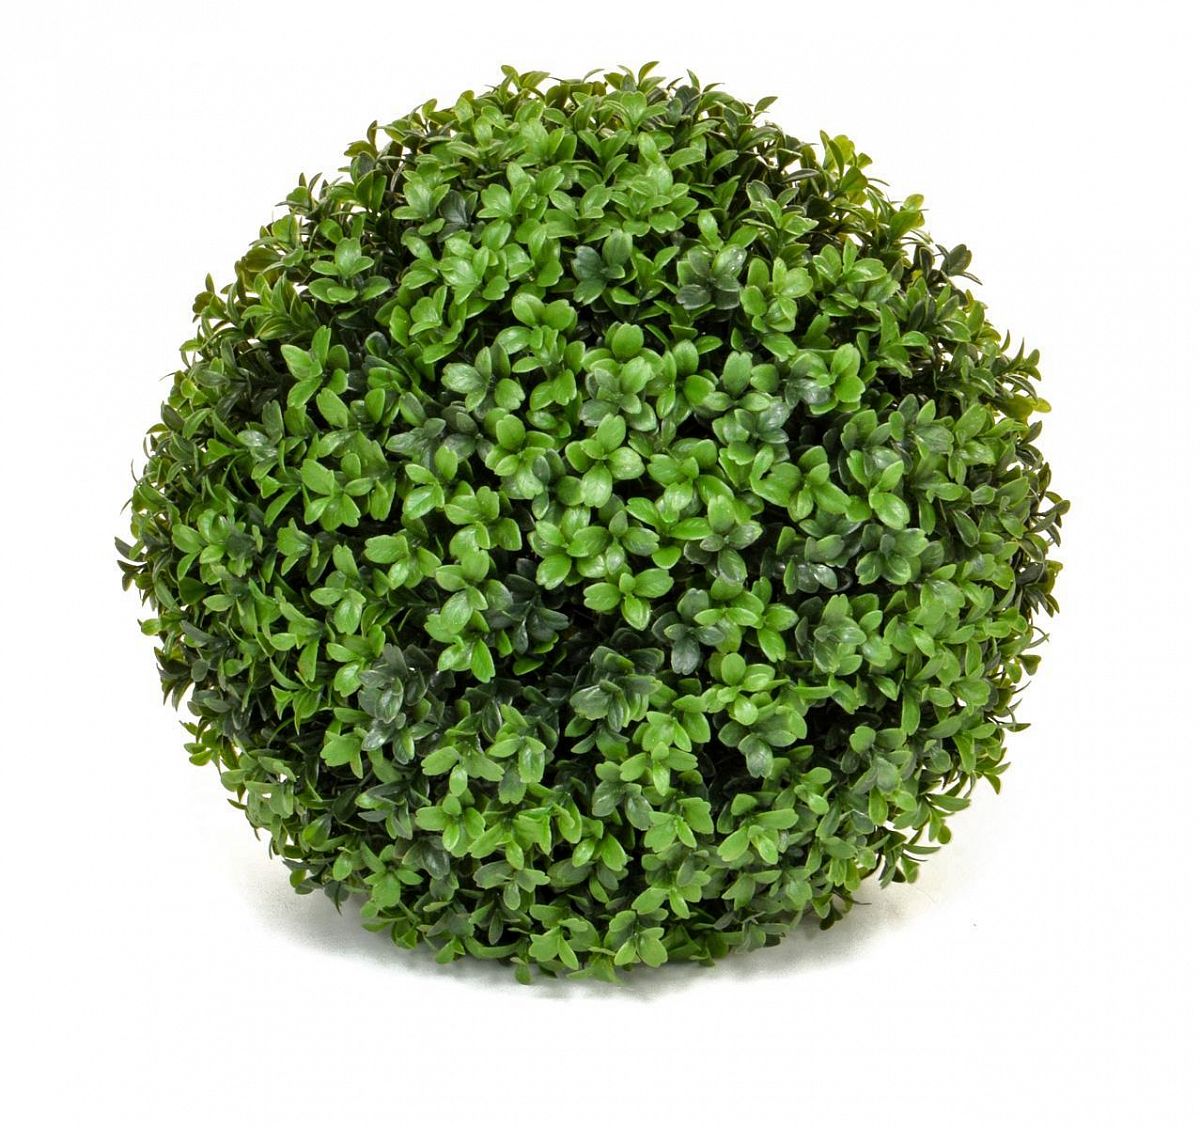 Topiary New Buxus Ball UV-resistant Artificial Bush Plant